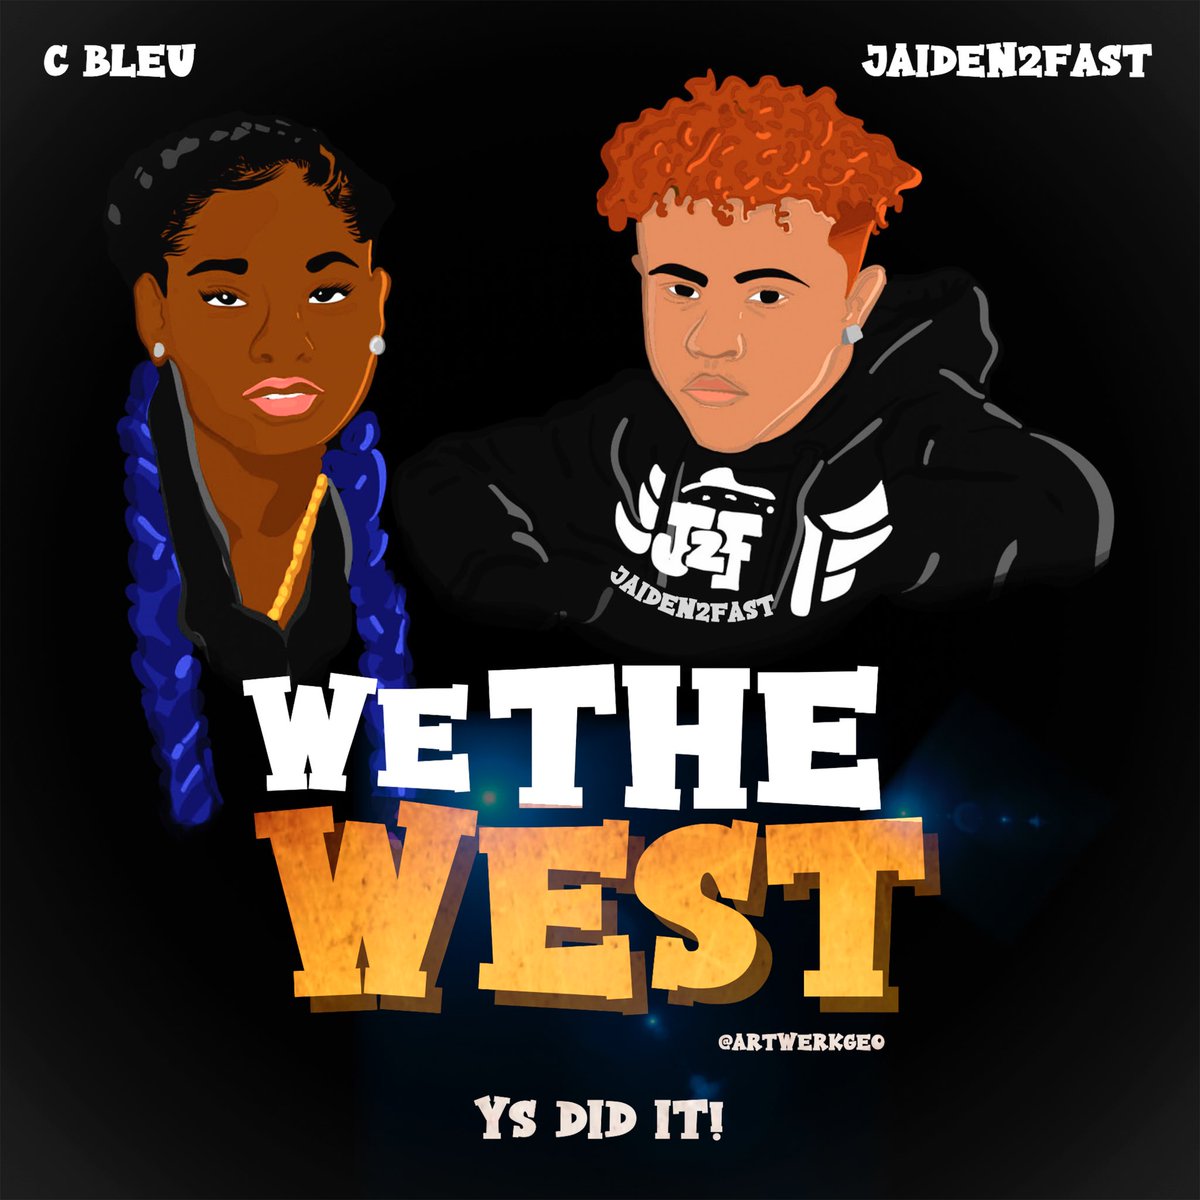 Stay tuned new record We the West ft. @cbleu1 coming soon.

#westcoasthiphop #listen #rapper #cool #spotify #soundcloud #musicindustry #rap #nomumblerap #newmusic #like #beautiful #applemusic #cbleu #musicvideo #jaiden2fast #j2f #2fast #fastmediainc #fmi